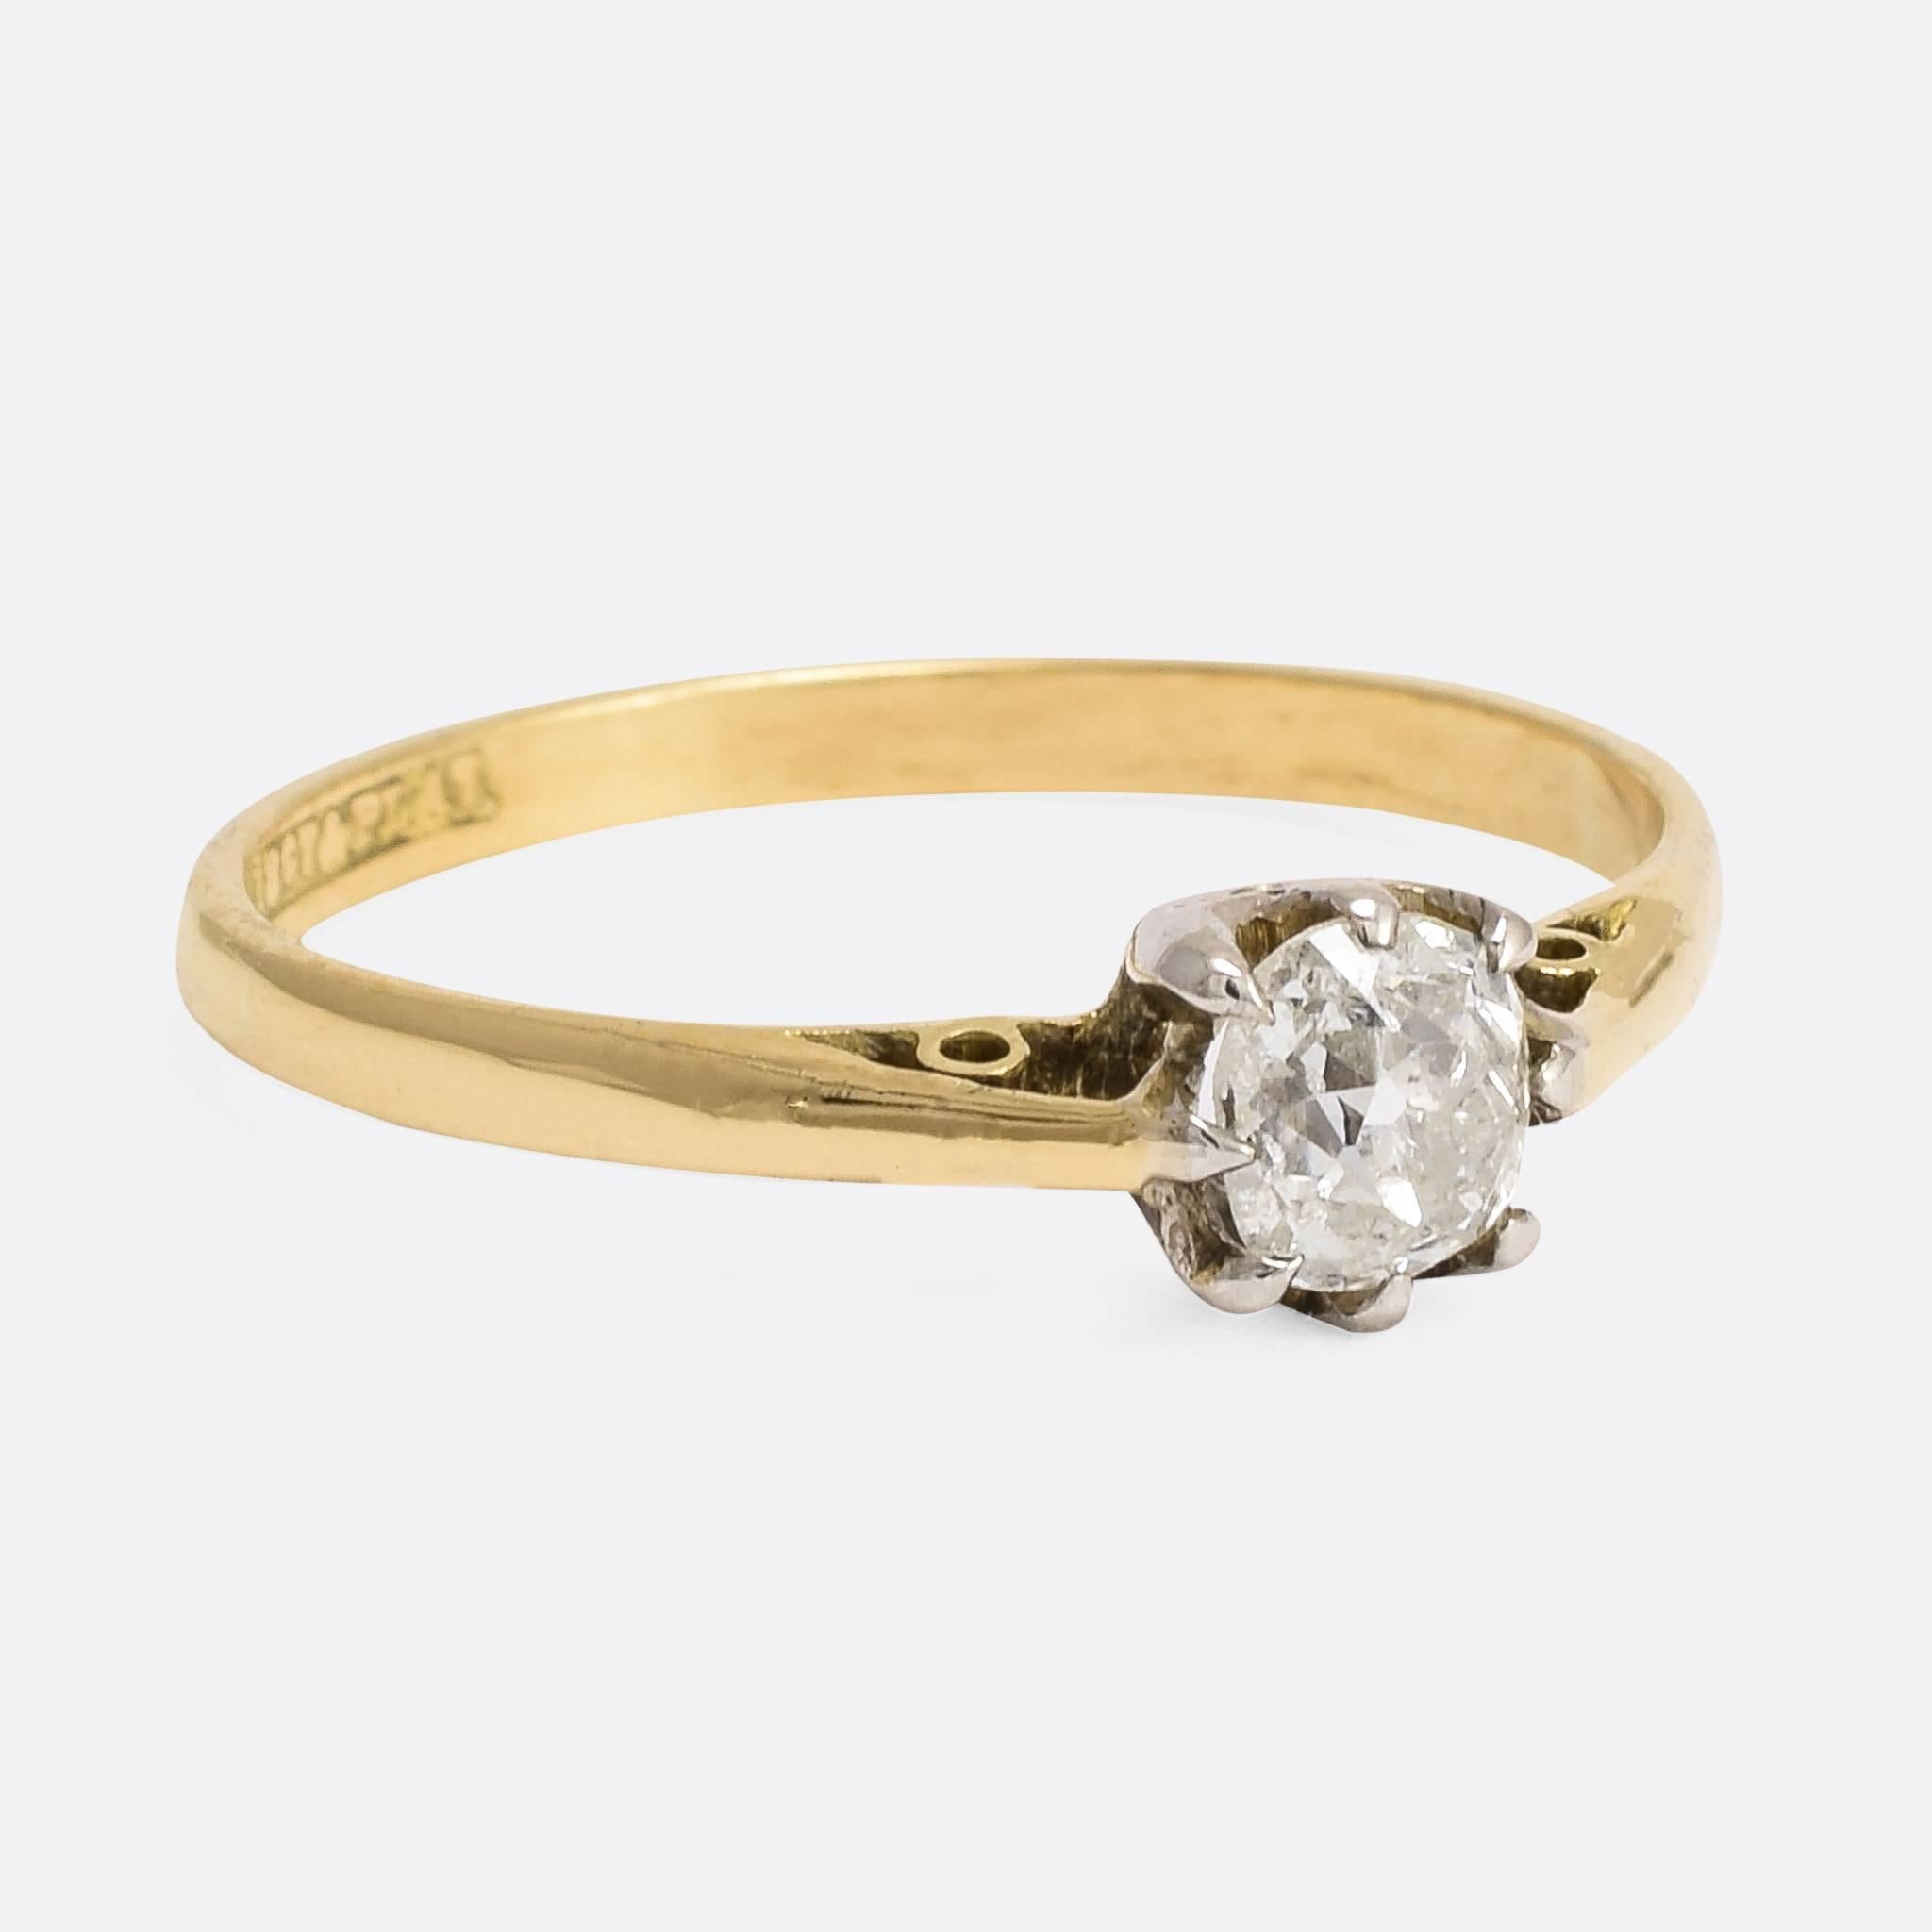 A very sweet antique engagement Ring. The 18ct gold and platinum mount is set with a lovely half carat cushion cut diamond in 8-claw setting - typical of the period. Ring Size: US: 6.75, or UK: N.